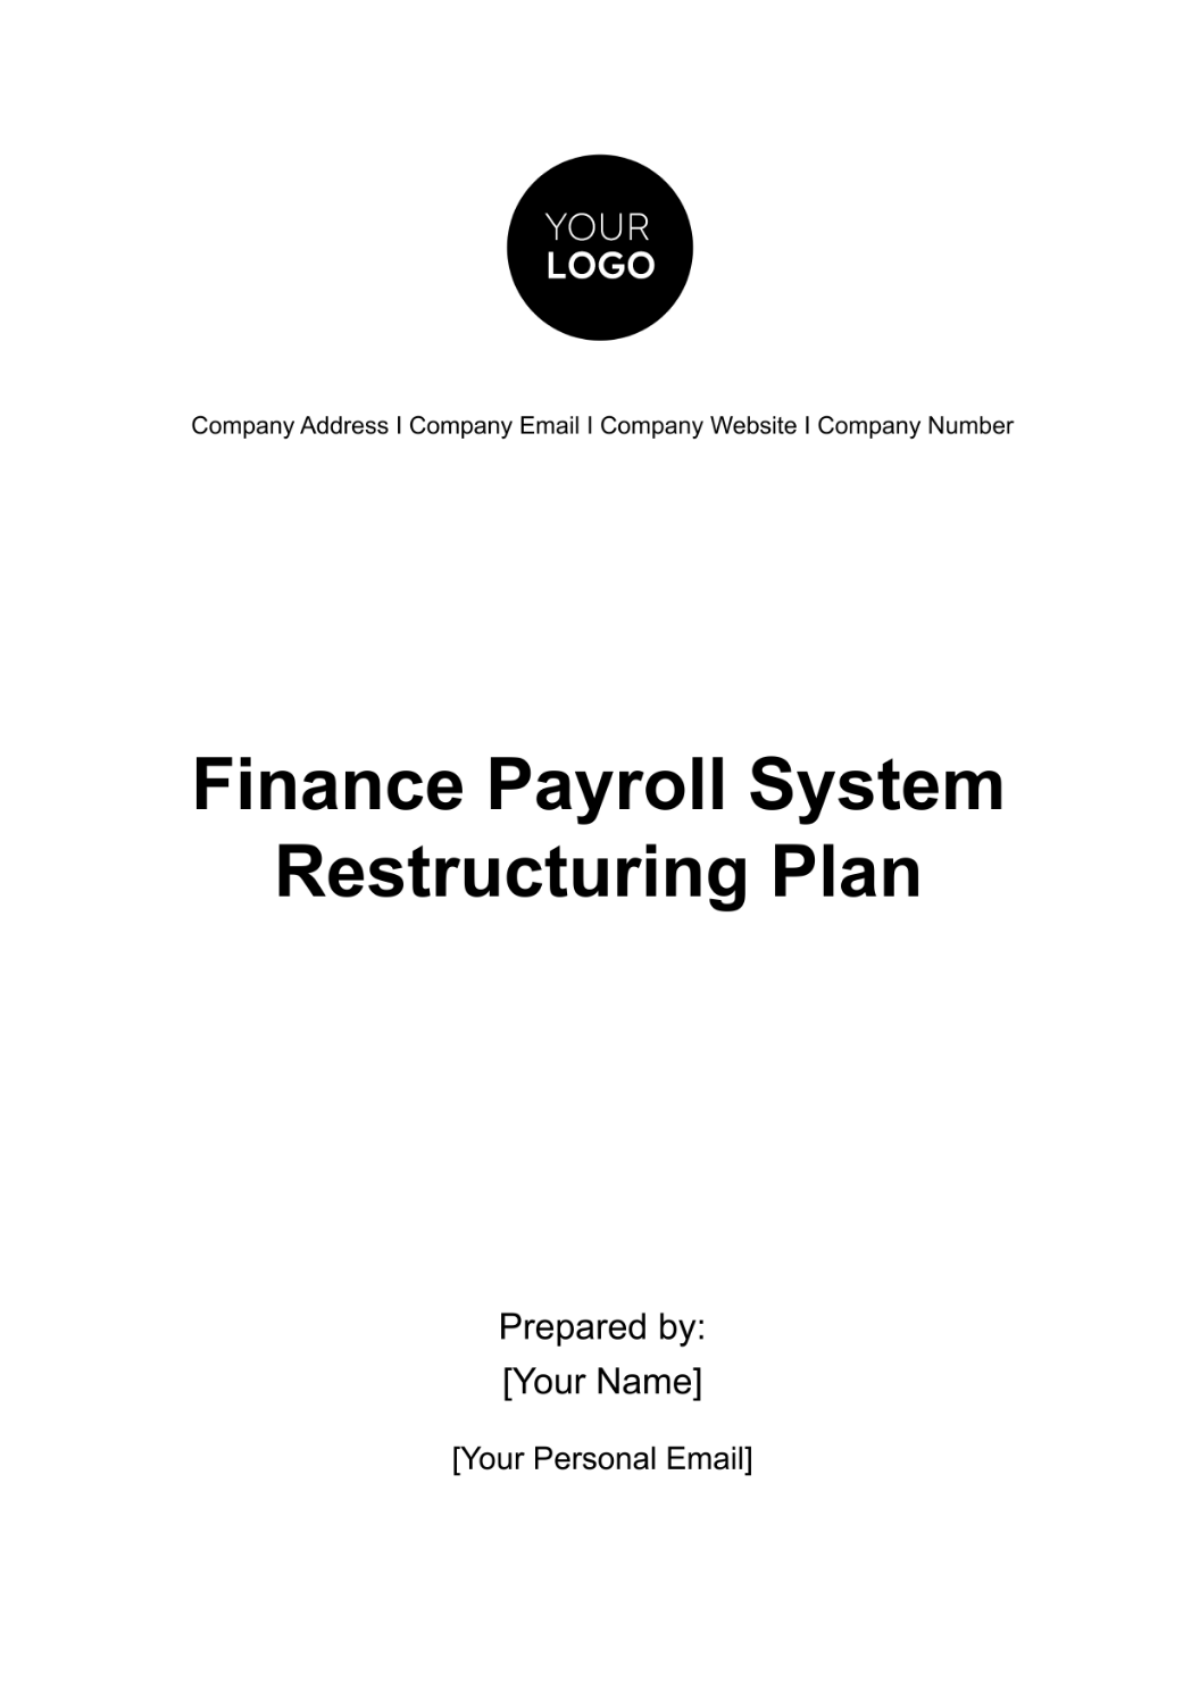 Finance Payroll System Restructuring Plan Template